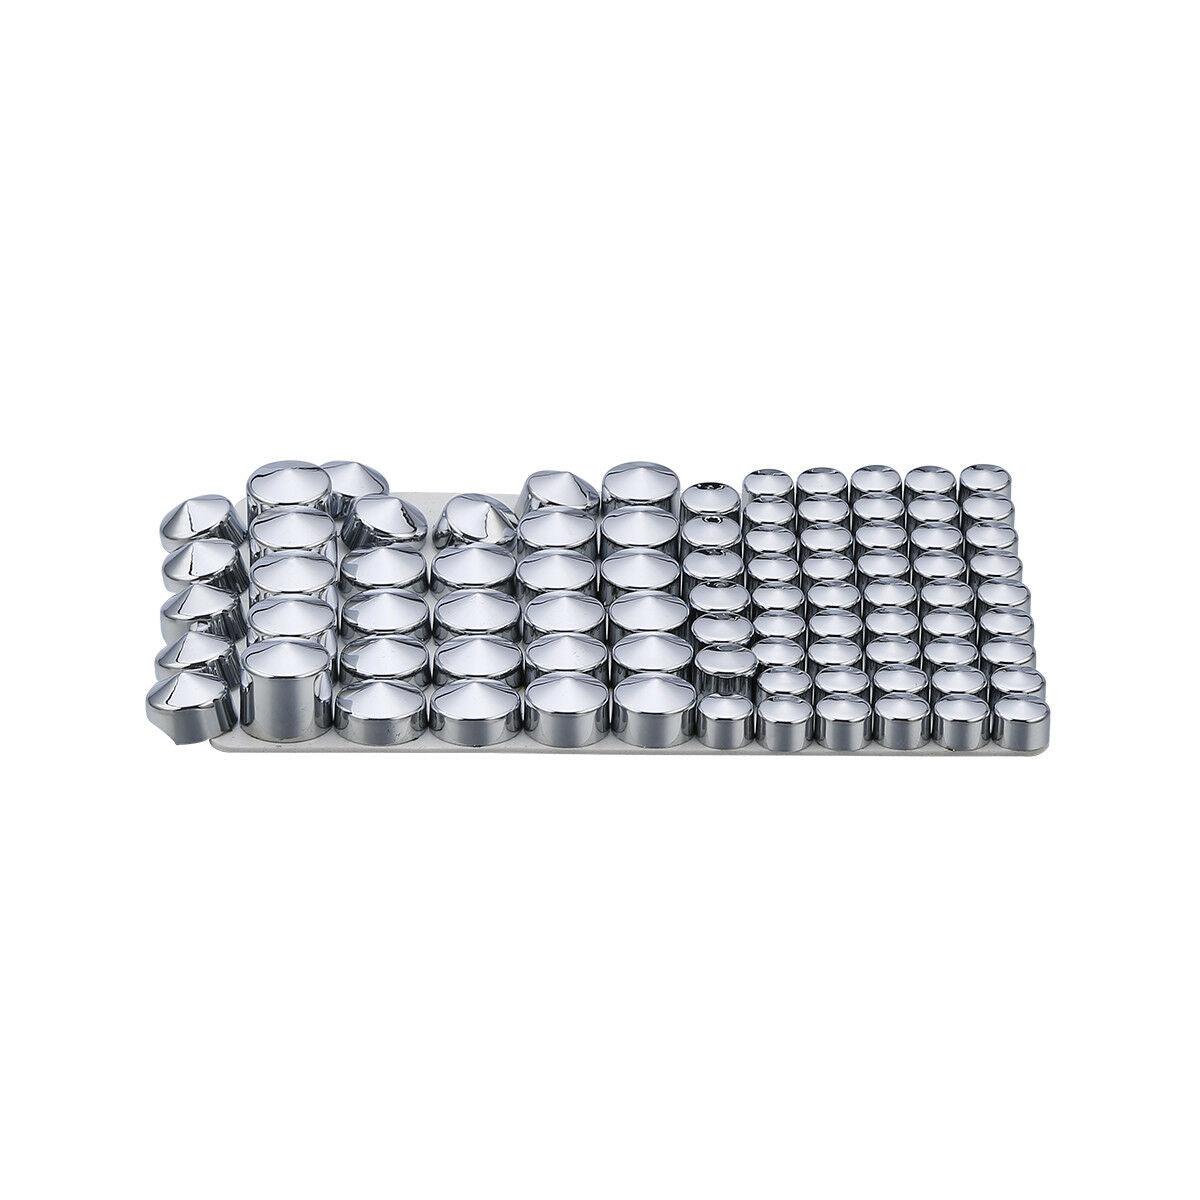 ABS 83 PCS Chrome Bolt Topper Cap Cover For Harley Twin Cam Road King FLHR 94-06 - Moto Life Products